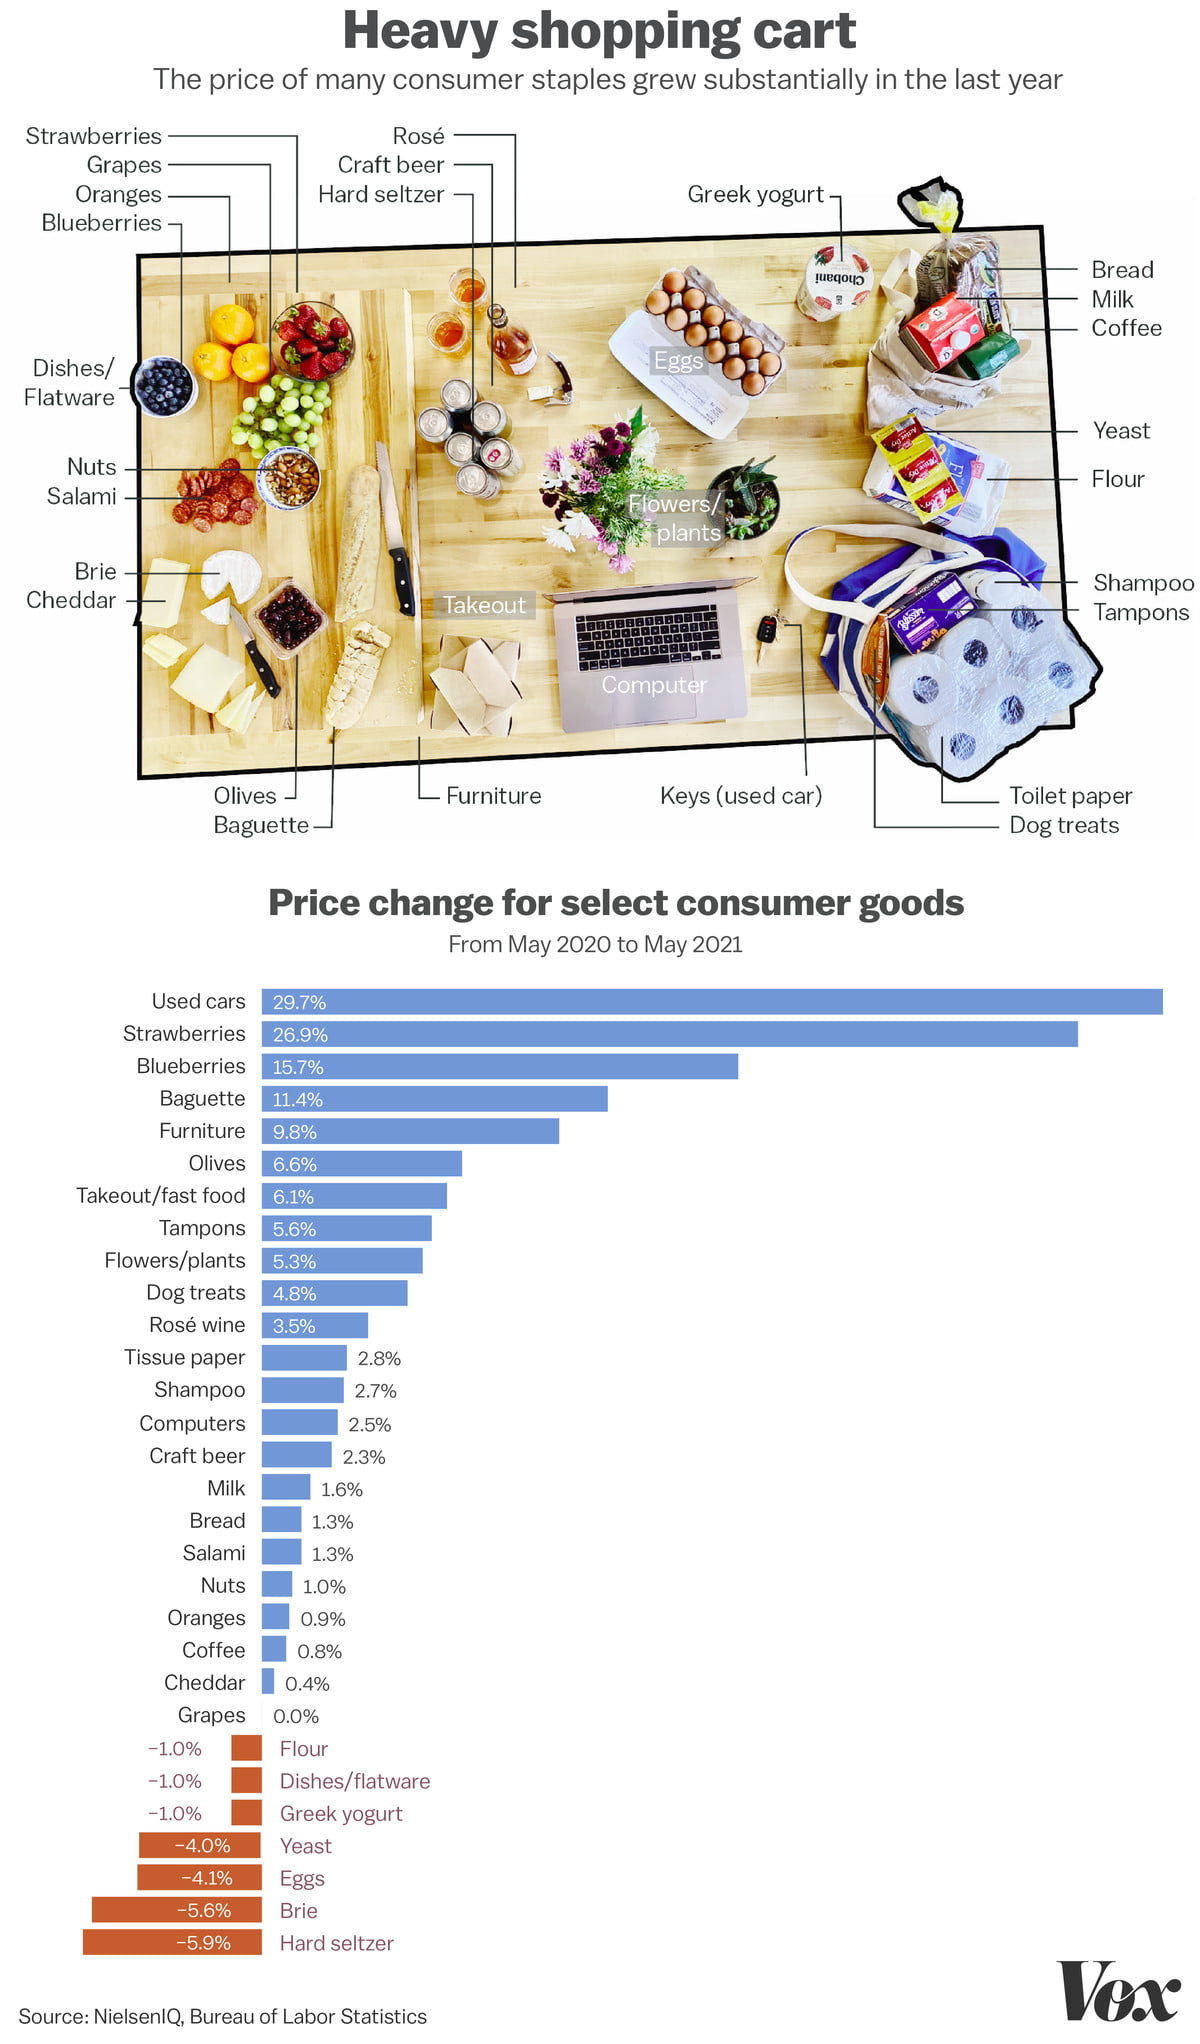 The price of many consumer goods grew substantially in the last year